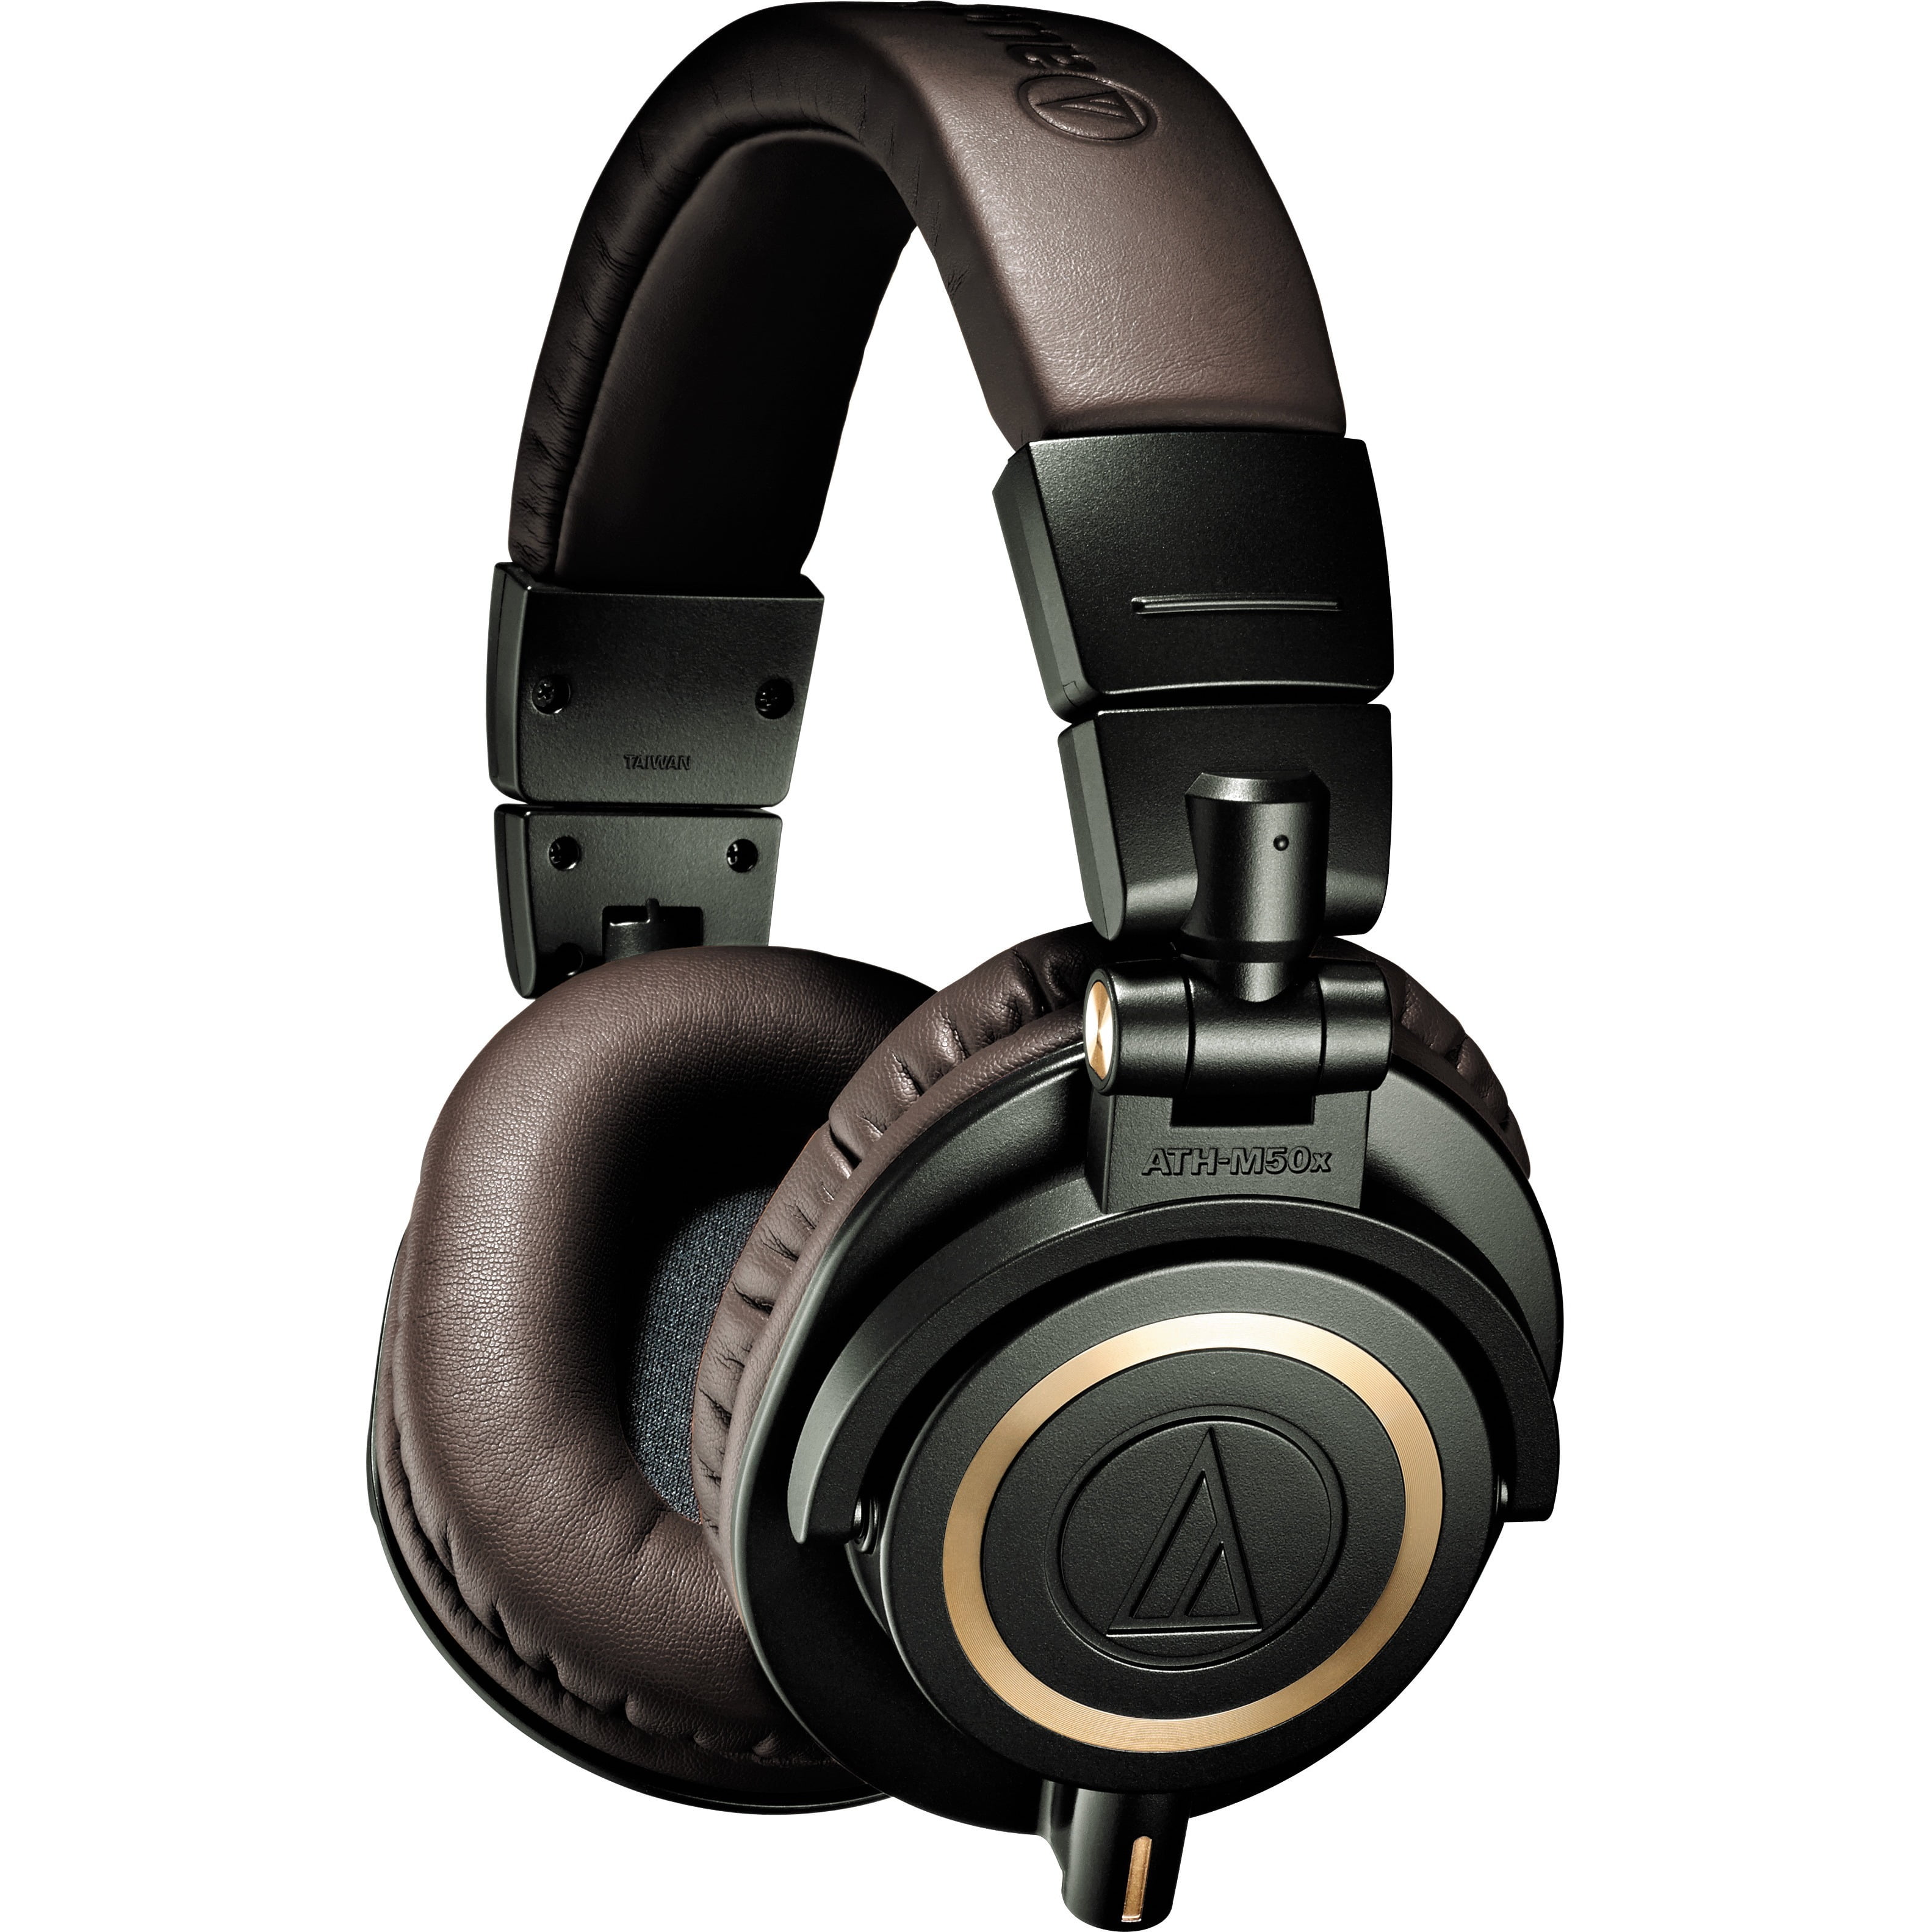 Limited Edition Professional Monitor Headphones